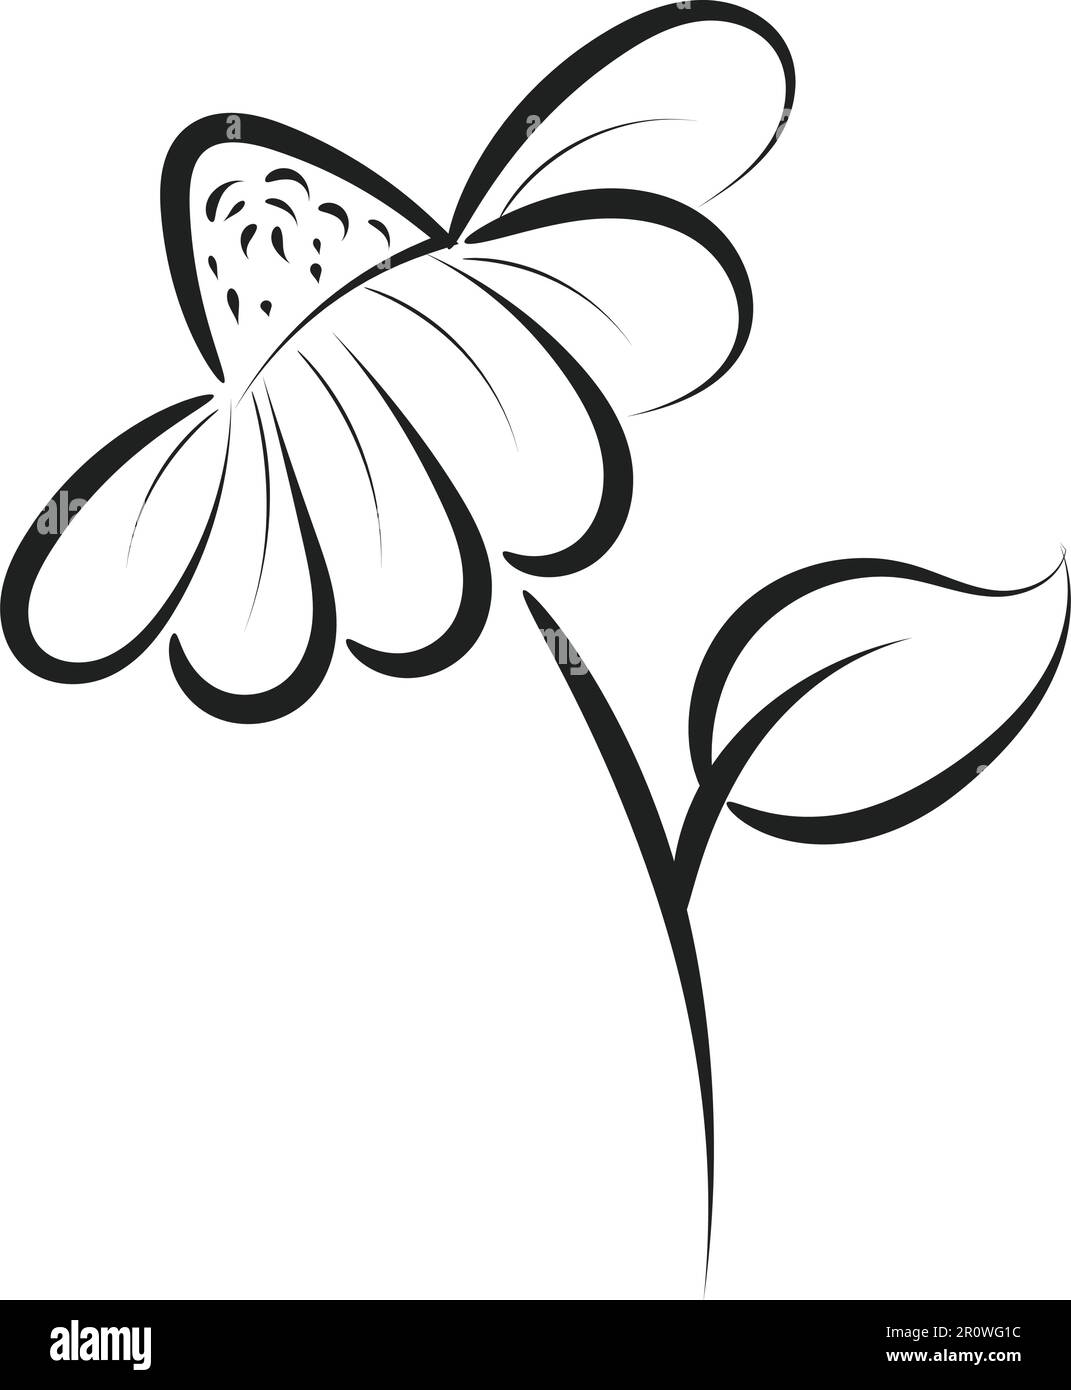 Simple Tattoo Sketches  ClipArt Best